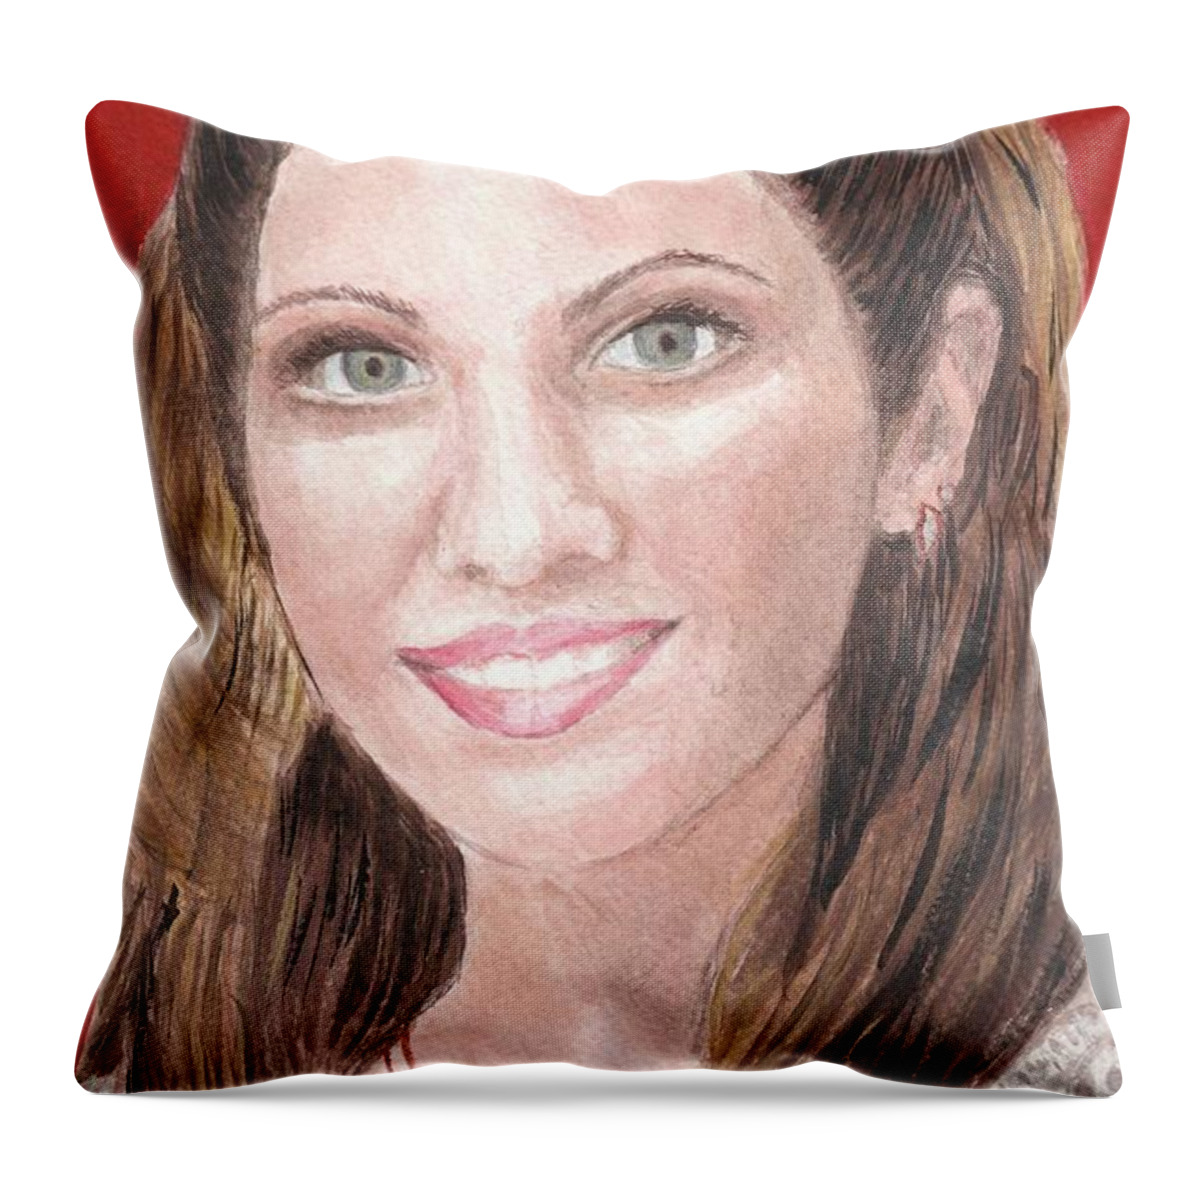 Jewlery Throw Pillow featuring the painting Lisa by Vickie G Buccini